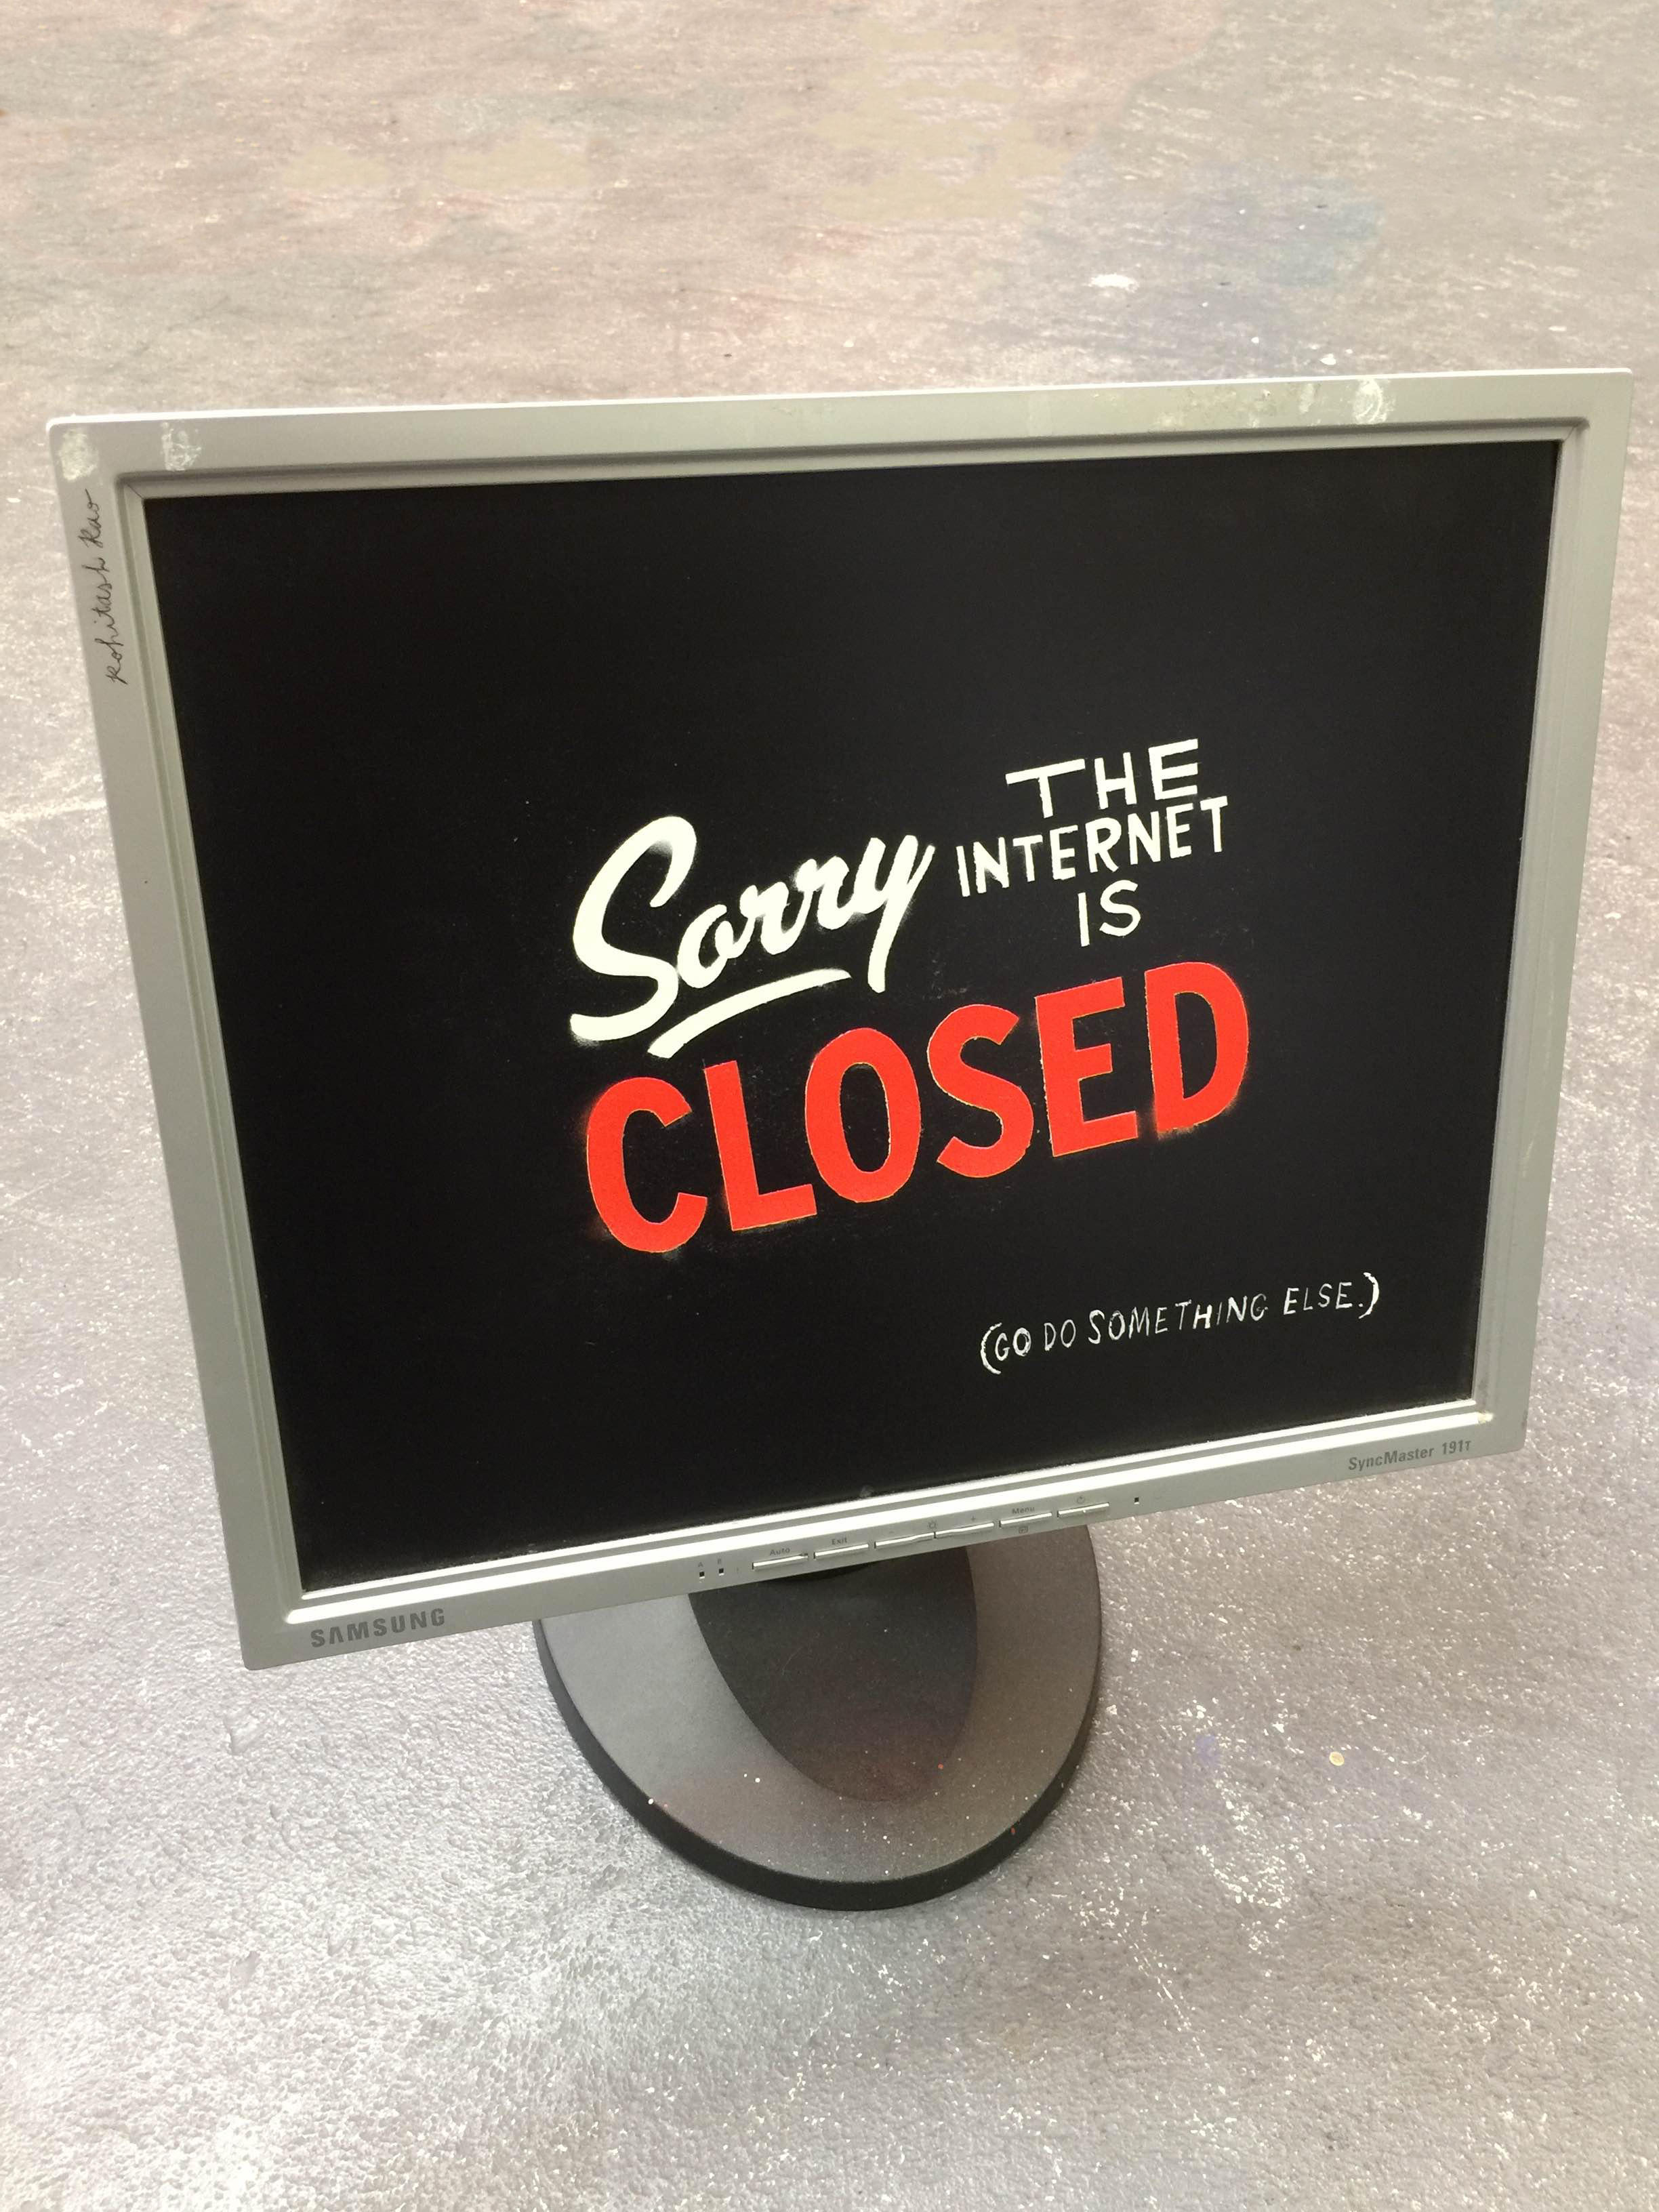 SORRY THE INTERNET IS CLOSED